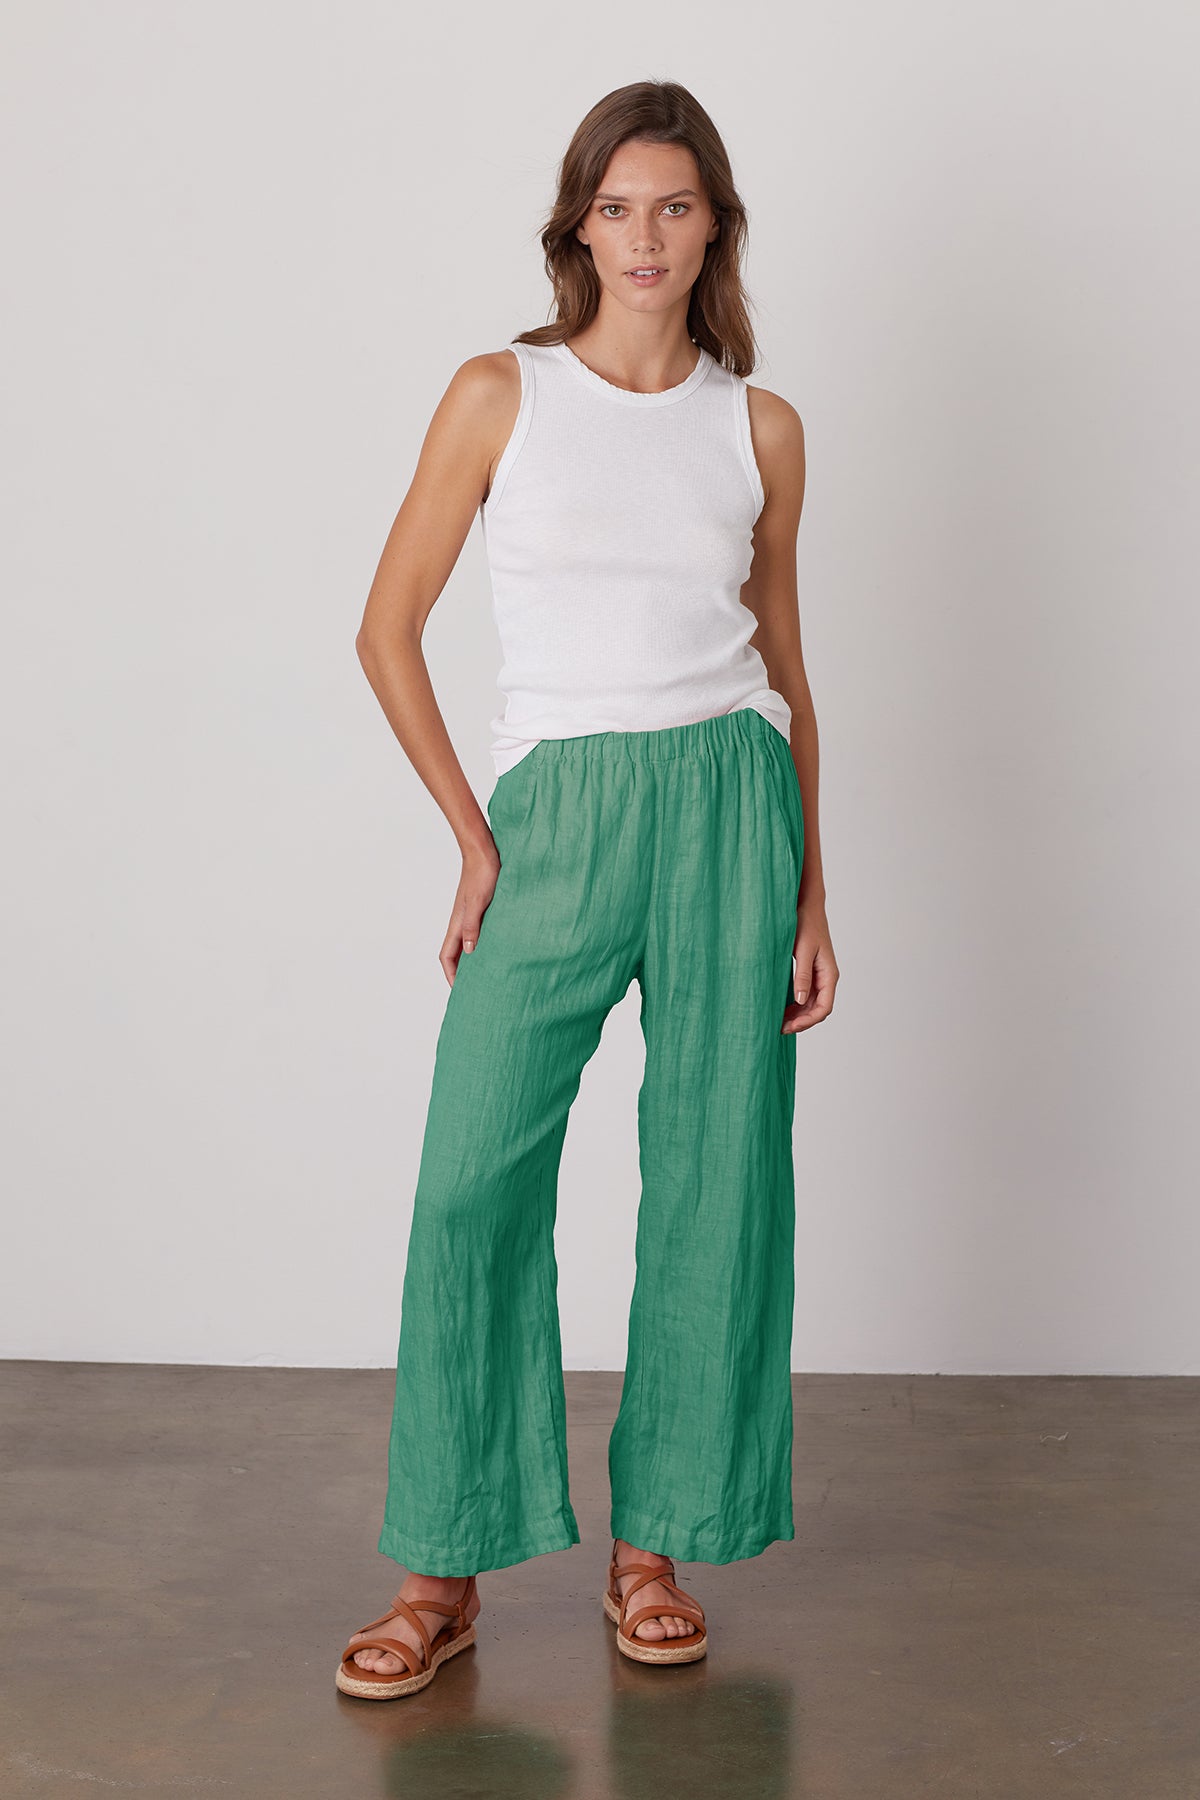 Lola linen pant in green apple with Maxie tank in white-25329014440129